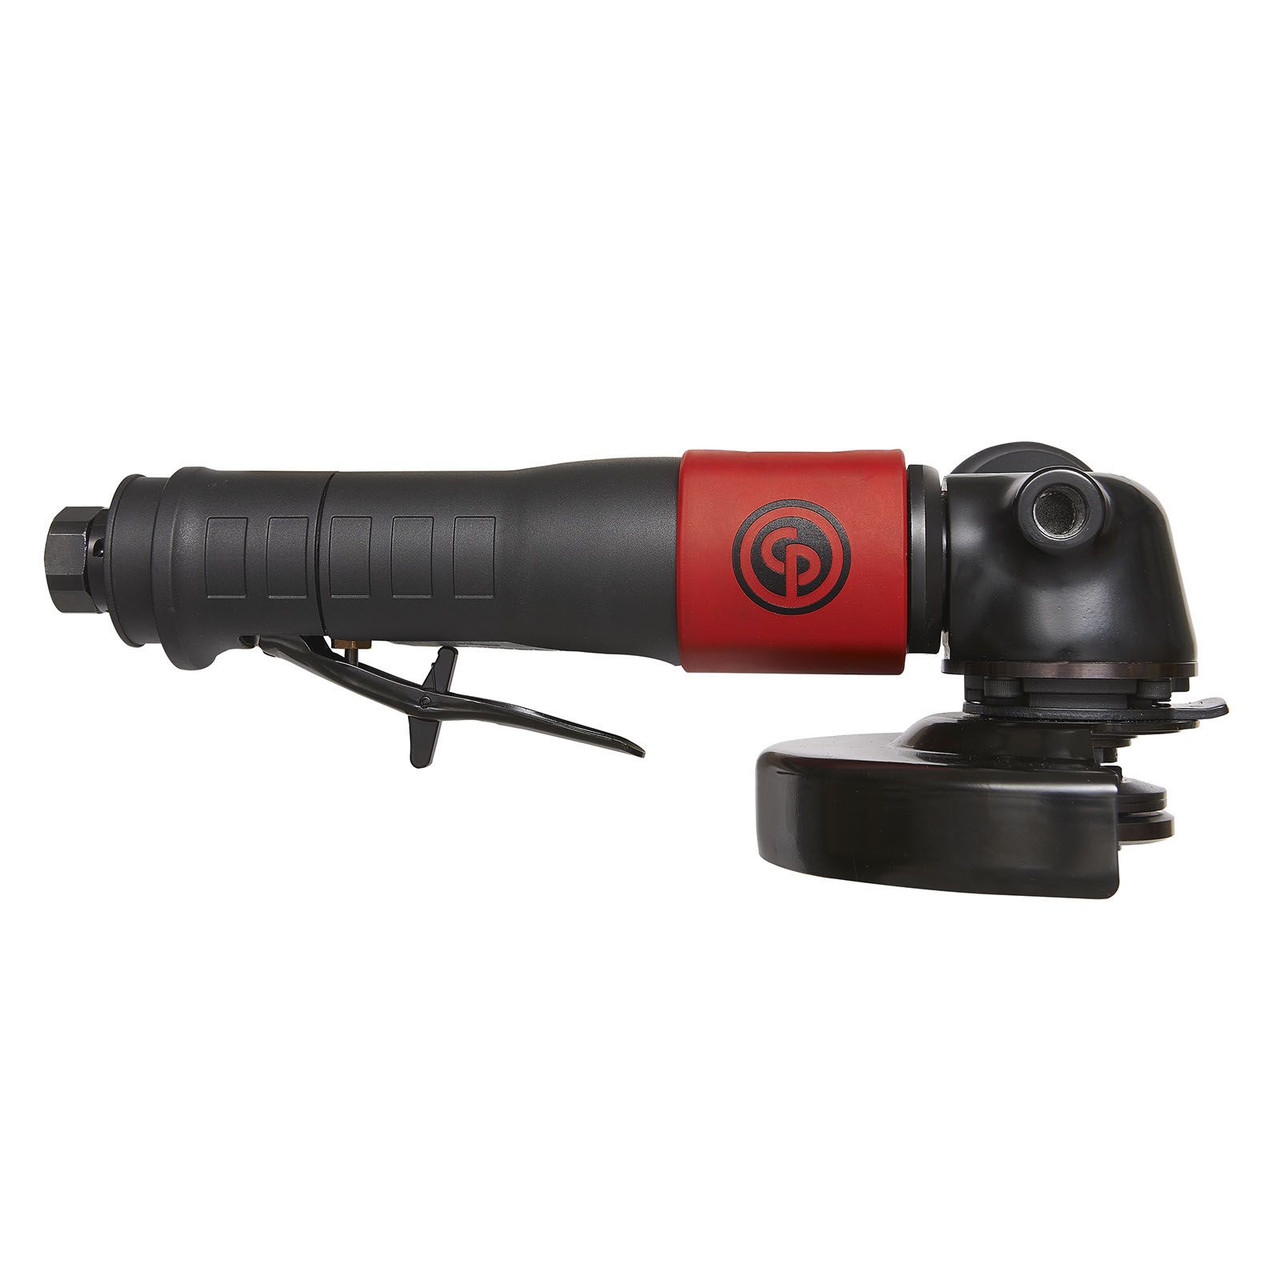 Chicago Pneumatic CP-7550-A - 5" (125mm) Heavy Duty Angle Grinder, 1.1HP (840W)